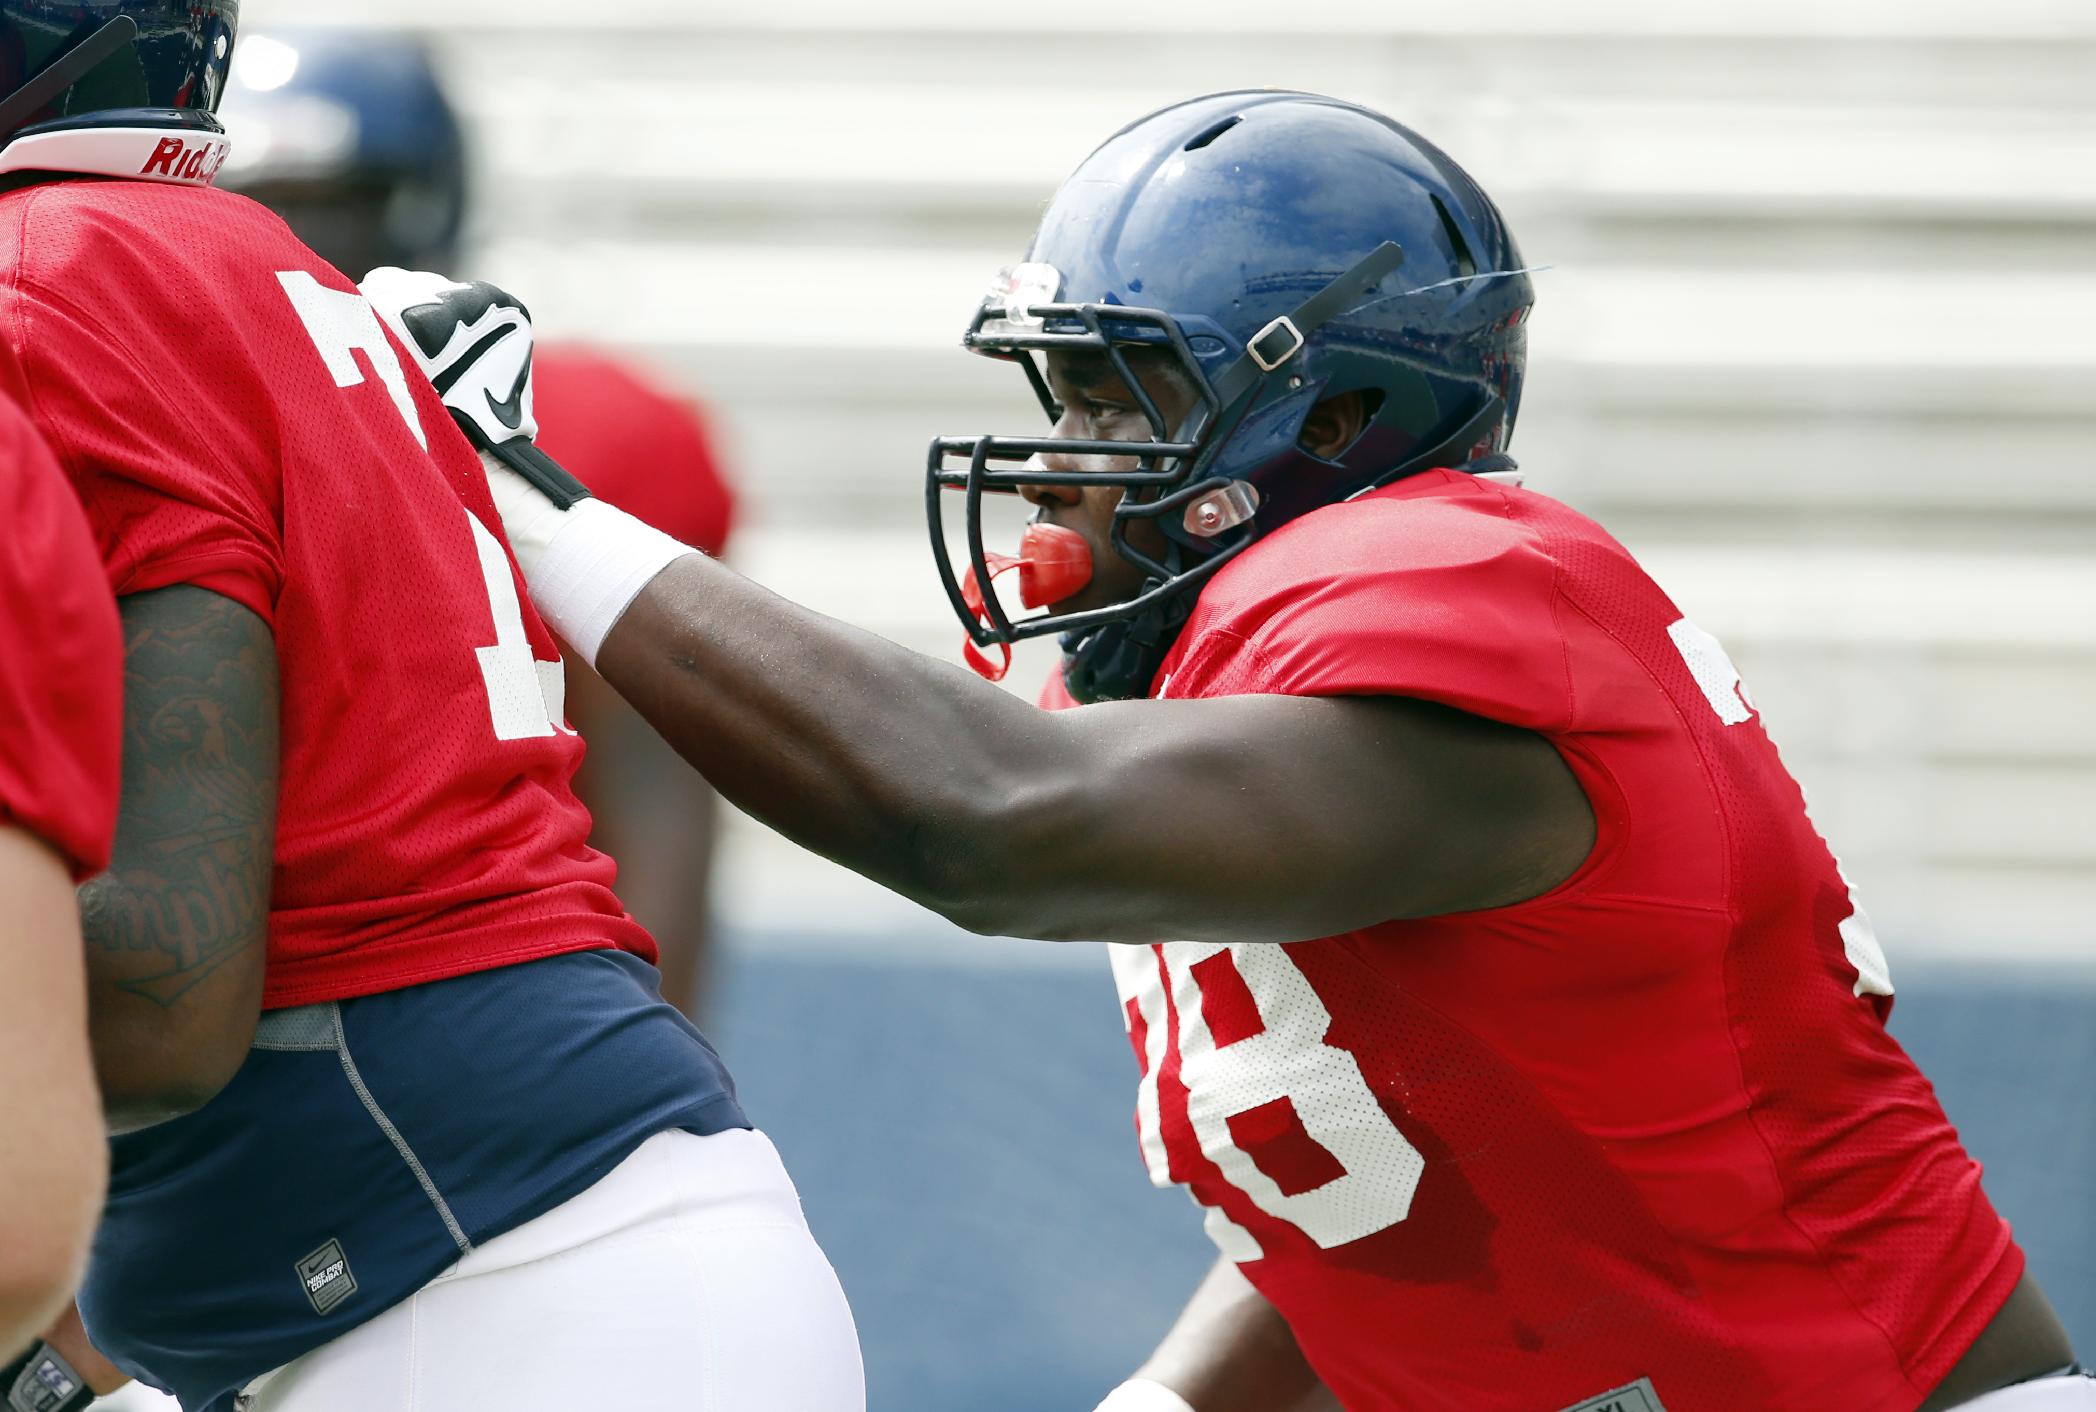 Mississippi offensive lineman Laremy Tunsil readies for a play during their final open NCAA college football practice, Saturday, Aug. 9, 2014, at Mississippi, in Oxford, Miss. Players were involved in individual and team drills. (AP Photo/Rogelio V. Solis)